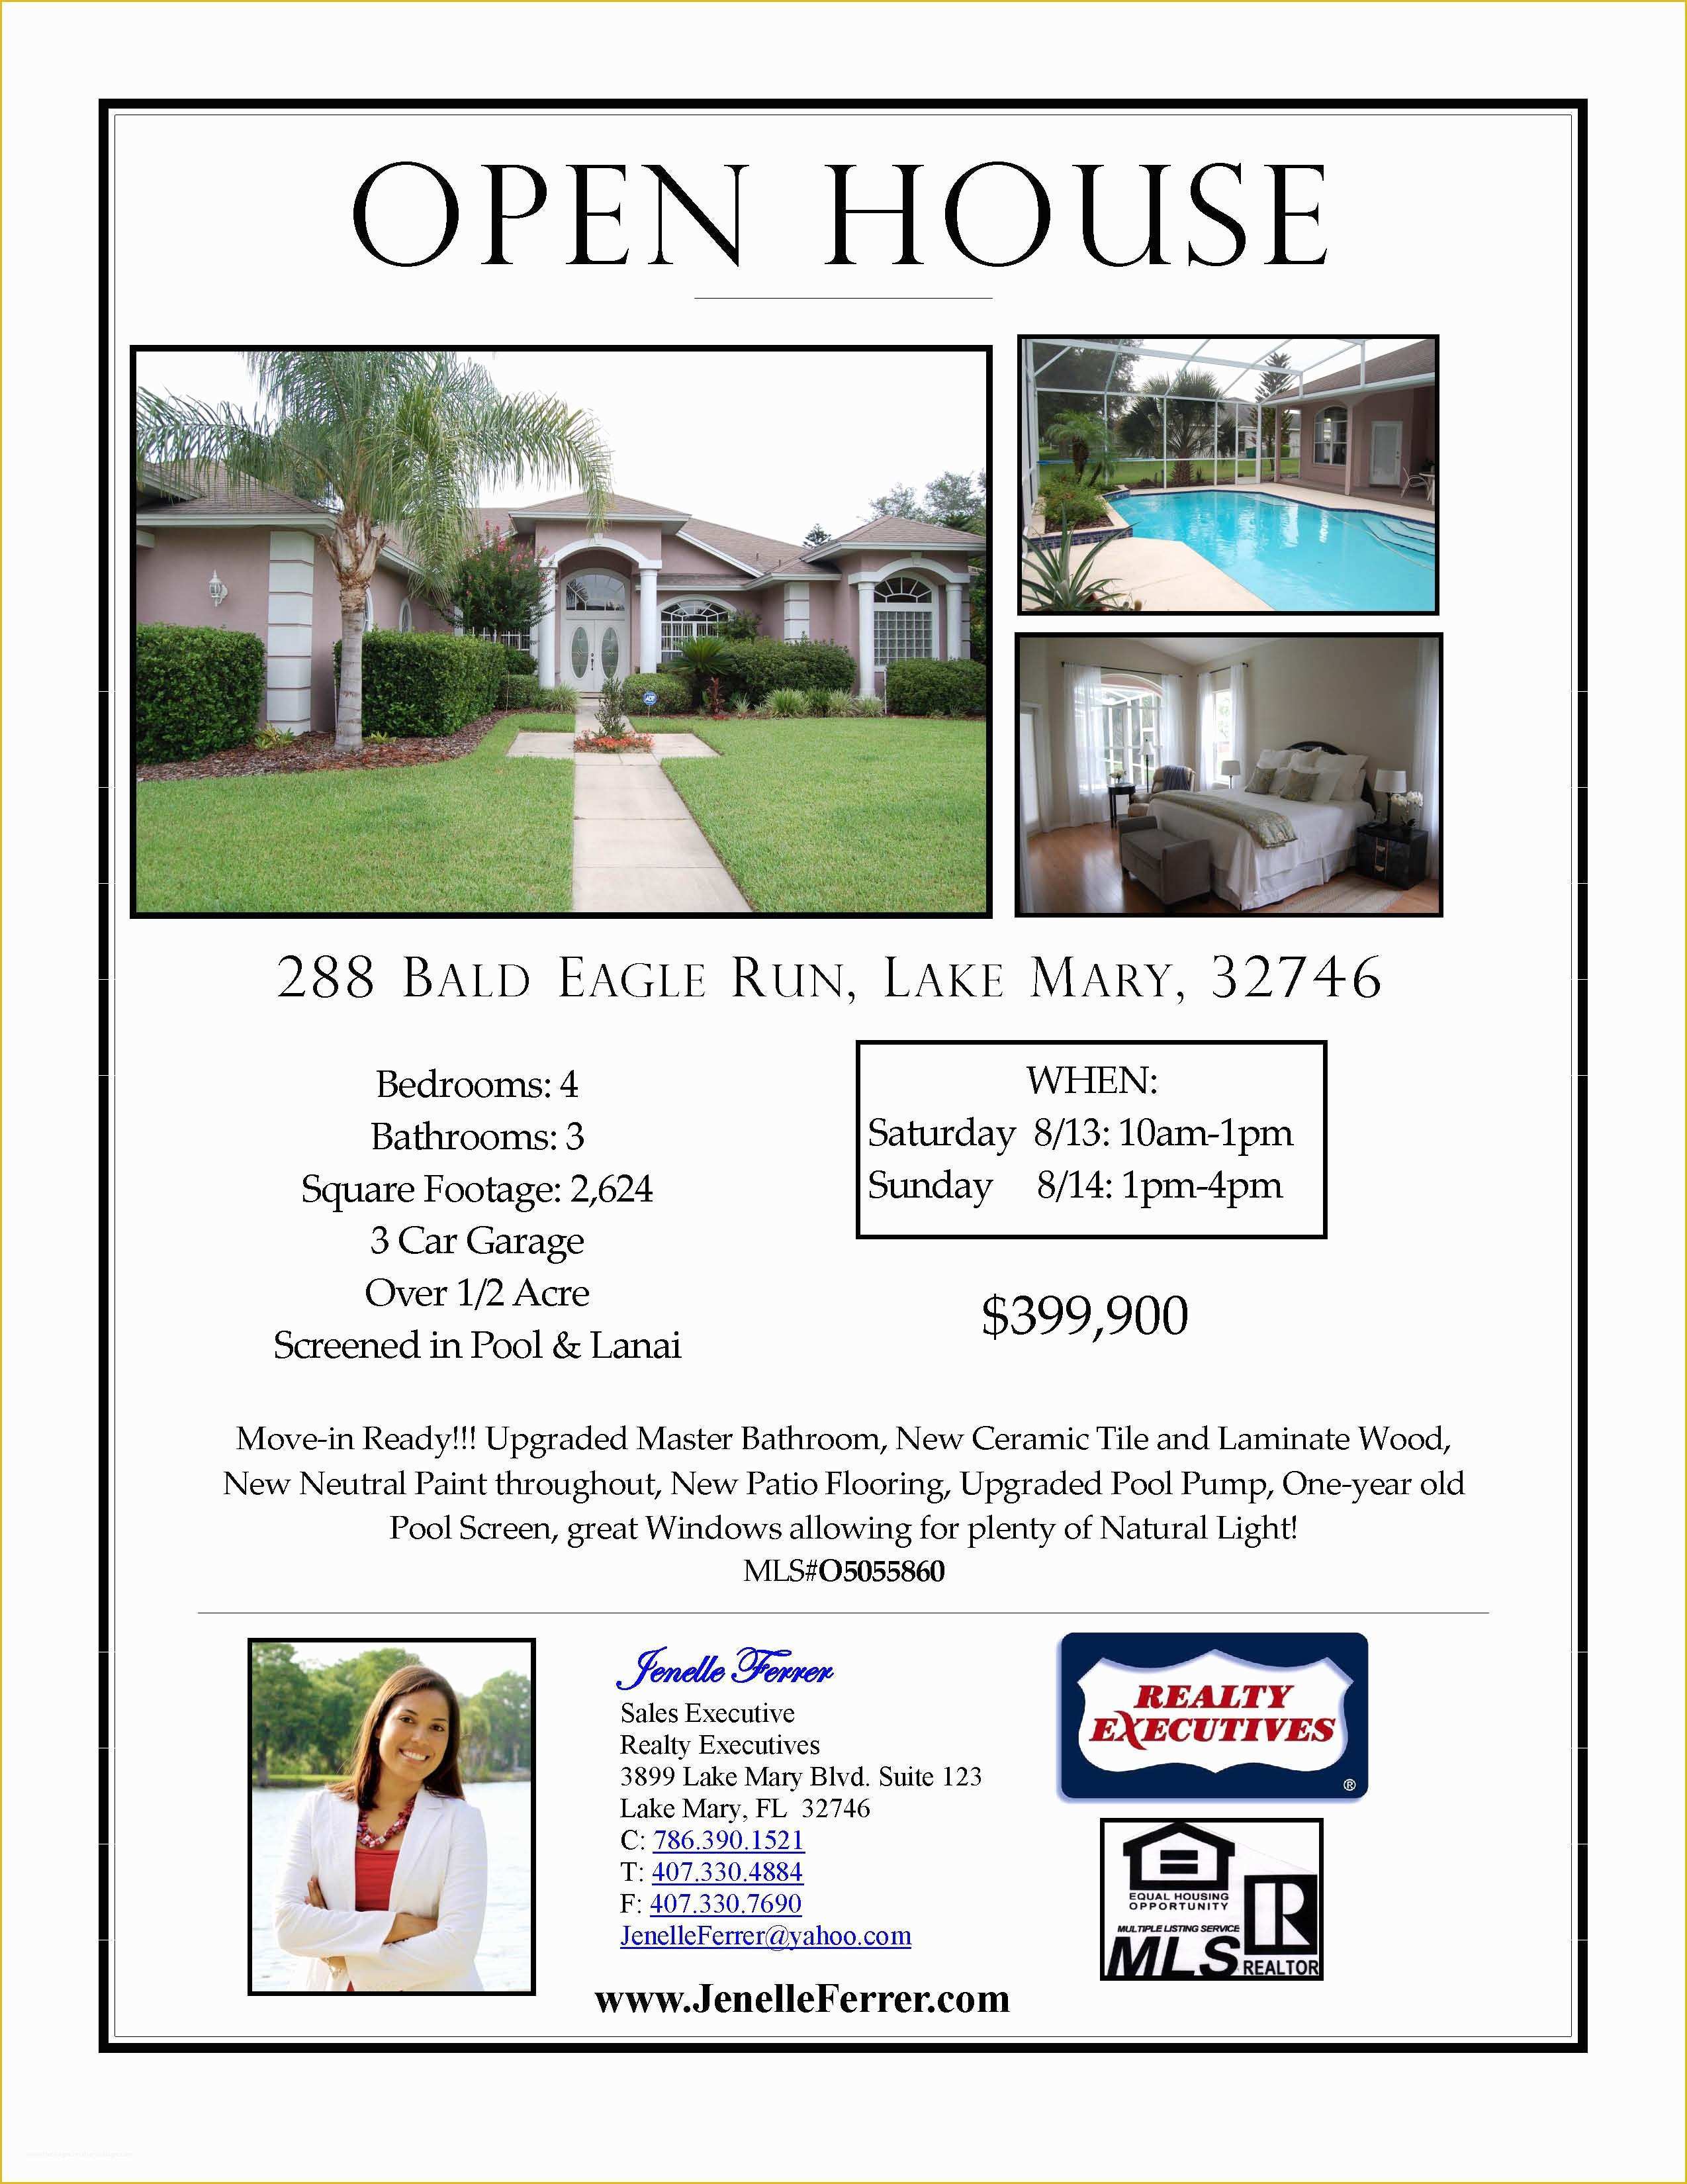 Free Open House Templates for Real Estate Of Lake Mary Fl Home